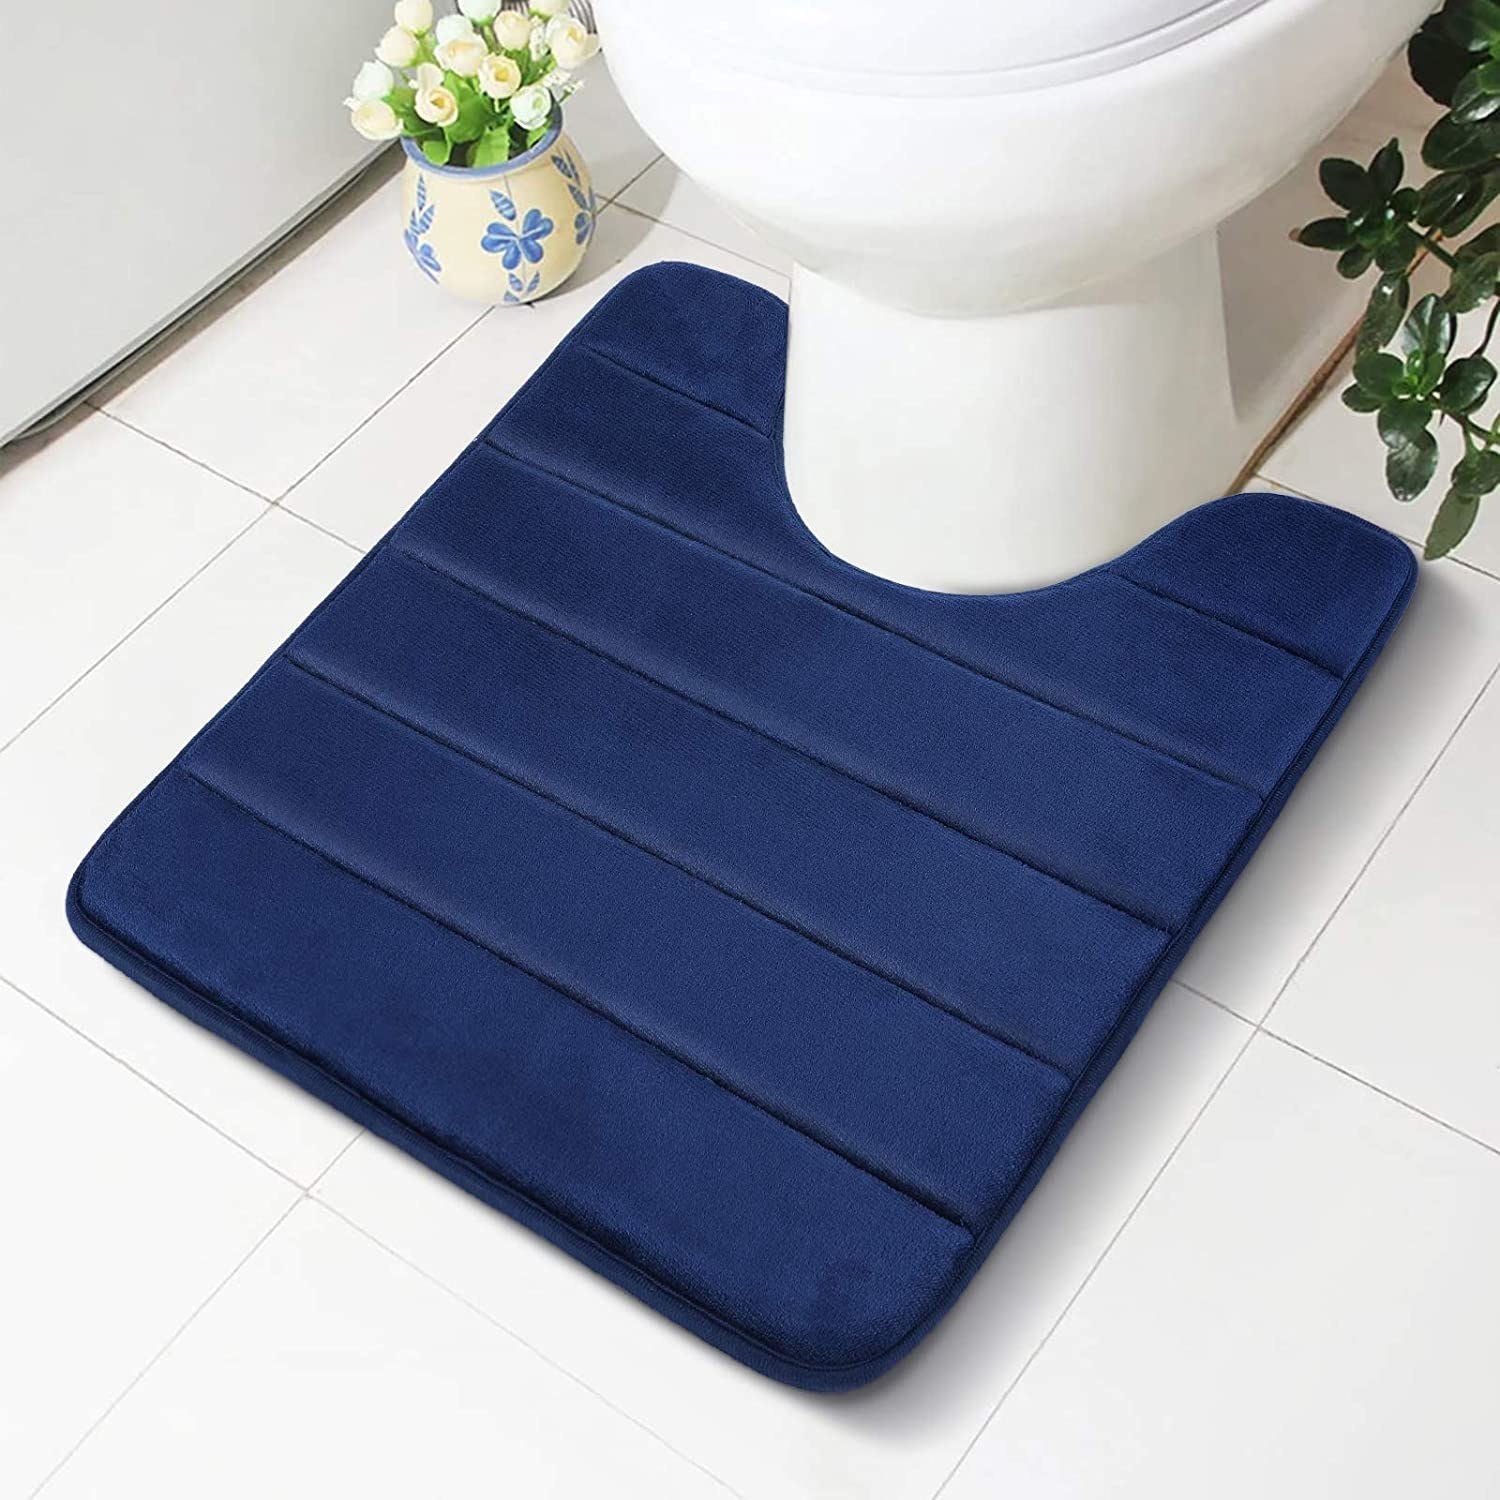 The toilet mat wrapped around the base of a toilet